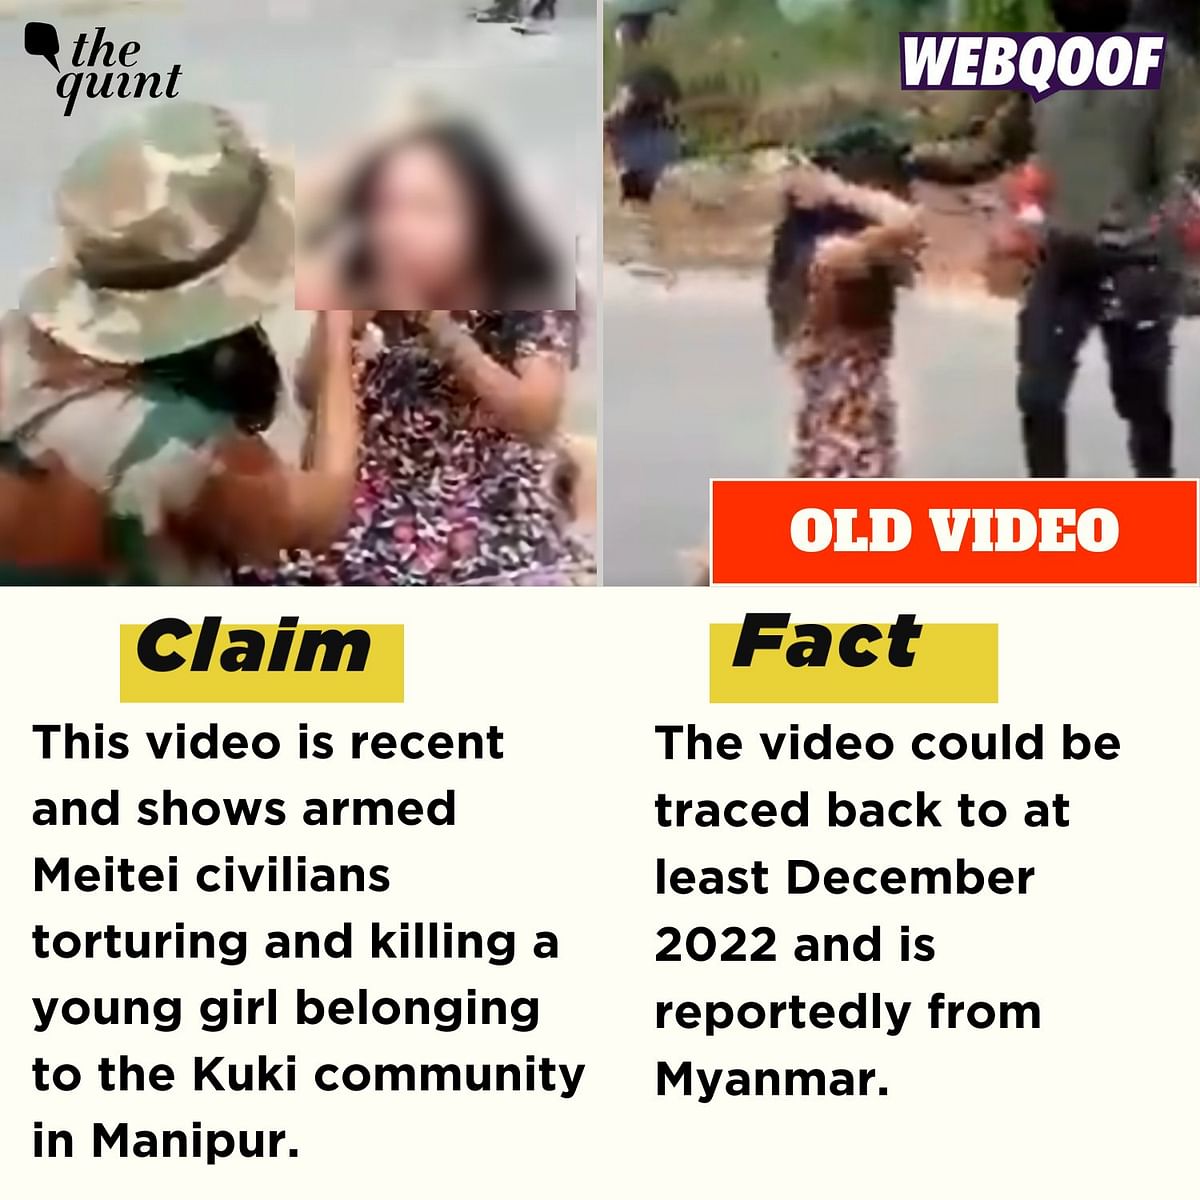 Although viral videos from Manipur are being regularly debunked, m/disinformation has been rampant. 